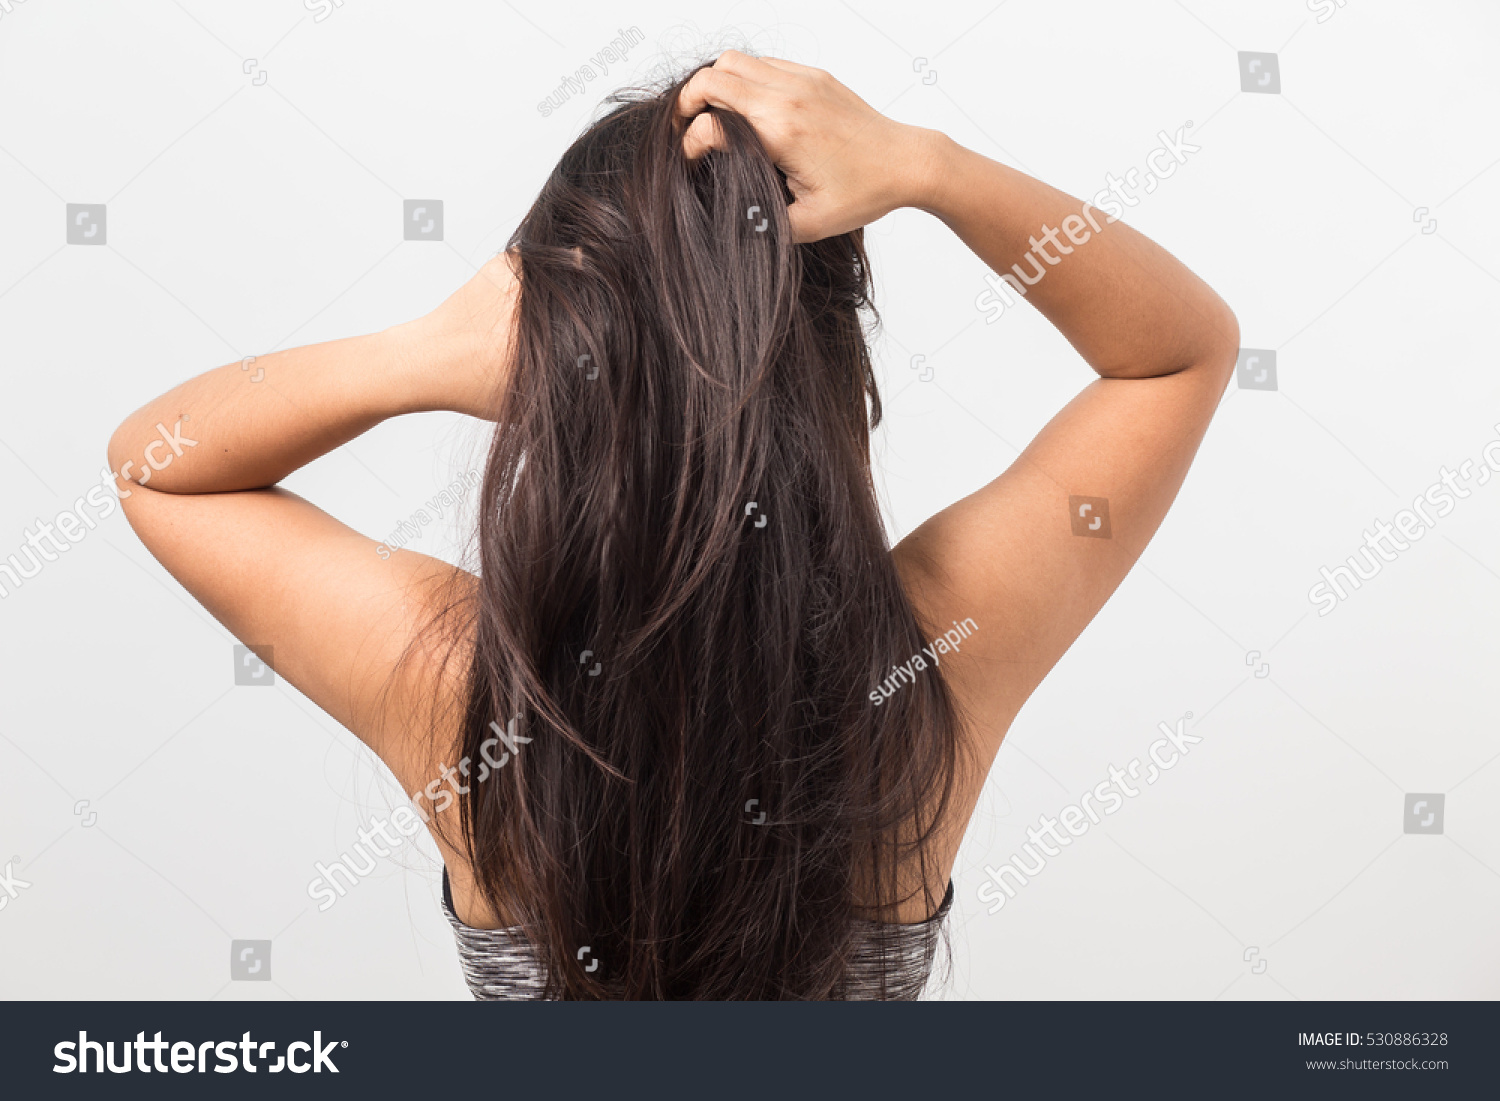 Women Itching Scalp Itchy His Hair Stock Photo 530886328 - Shutterstock